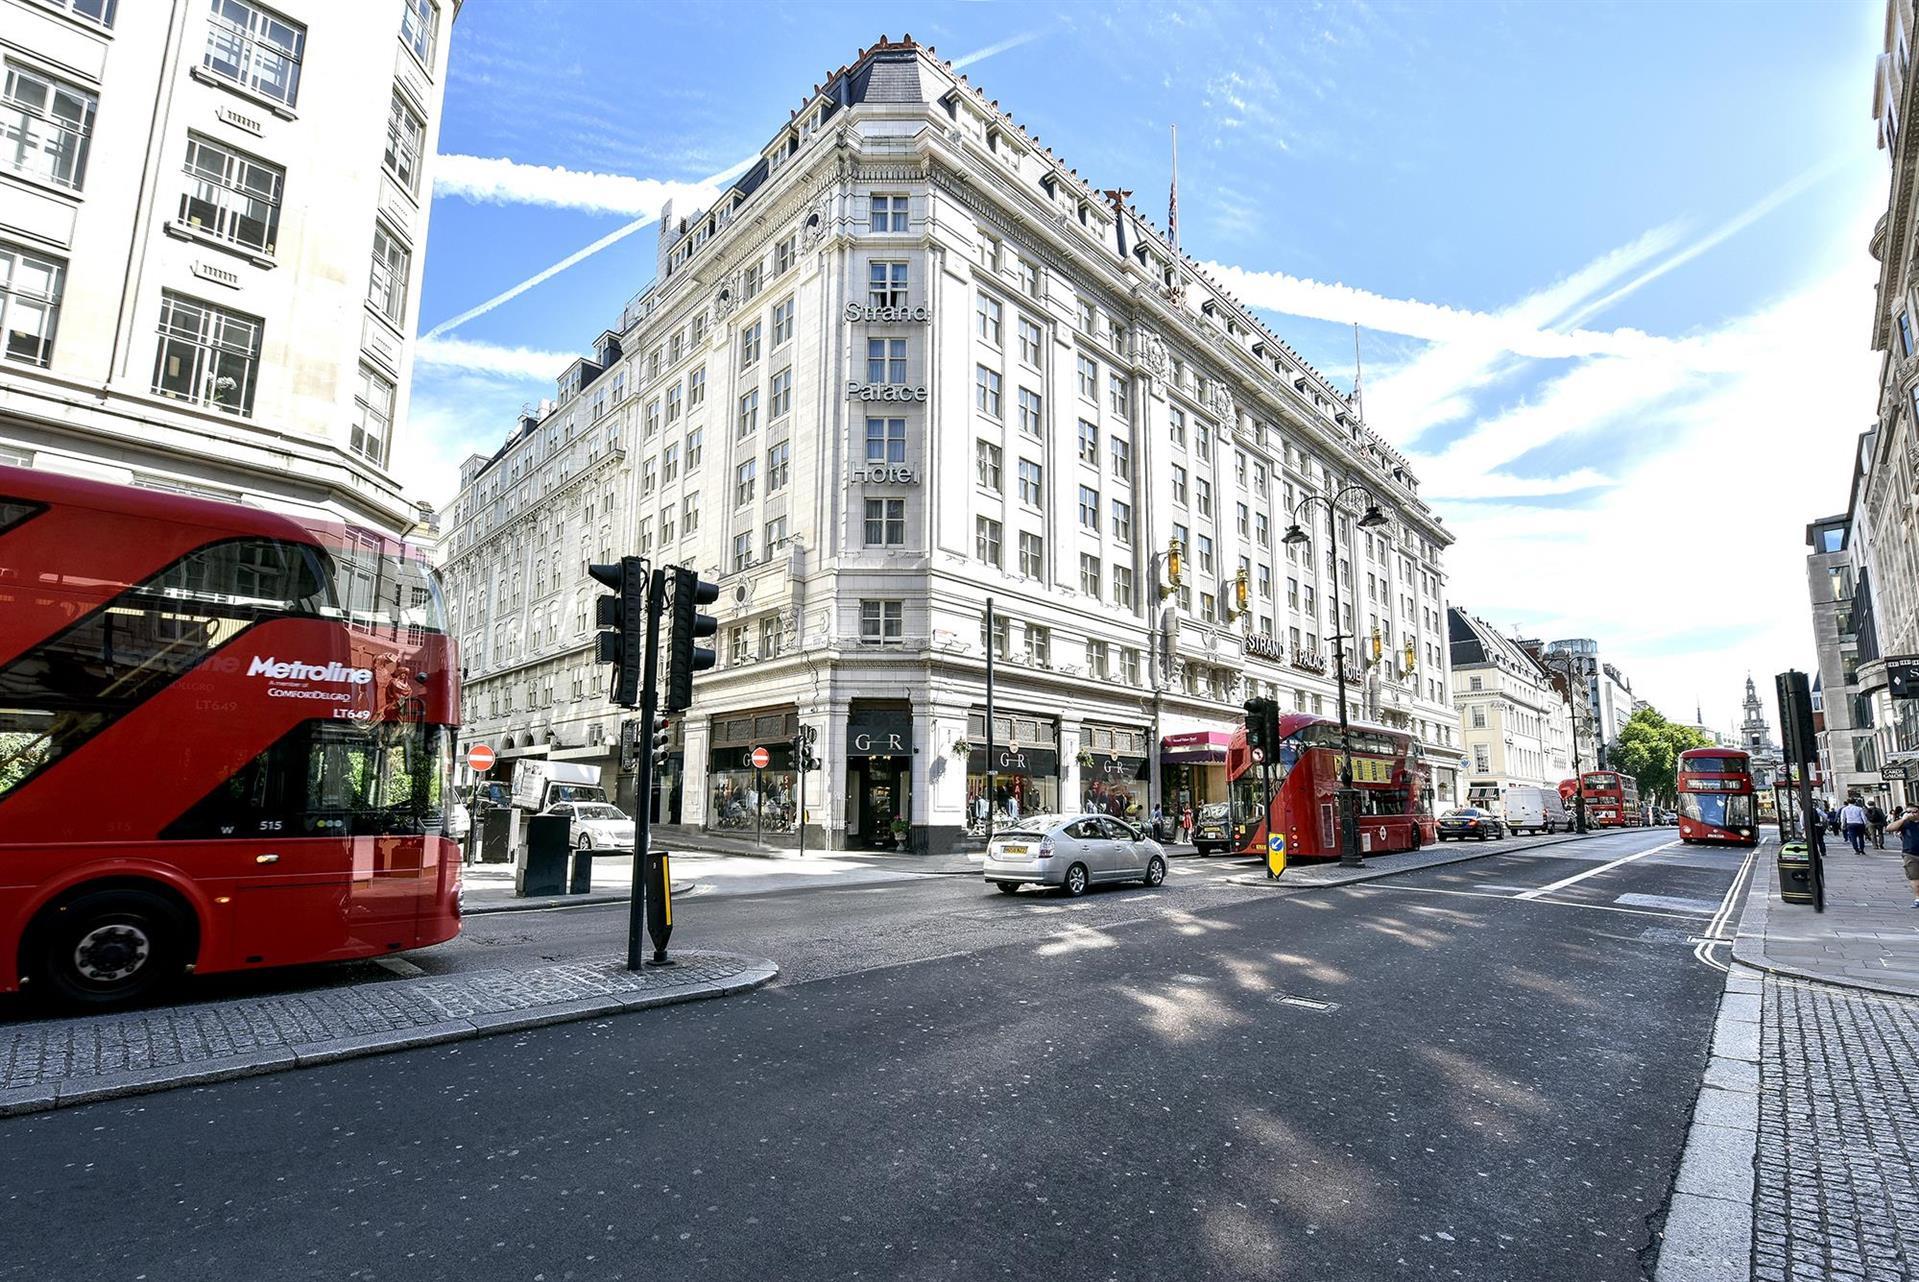 Strand Palace Hotel in London, GB1